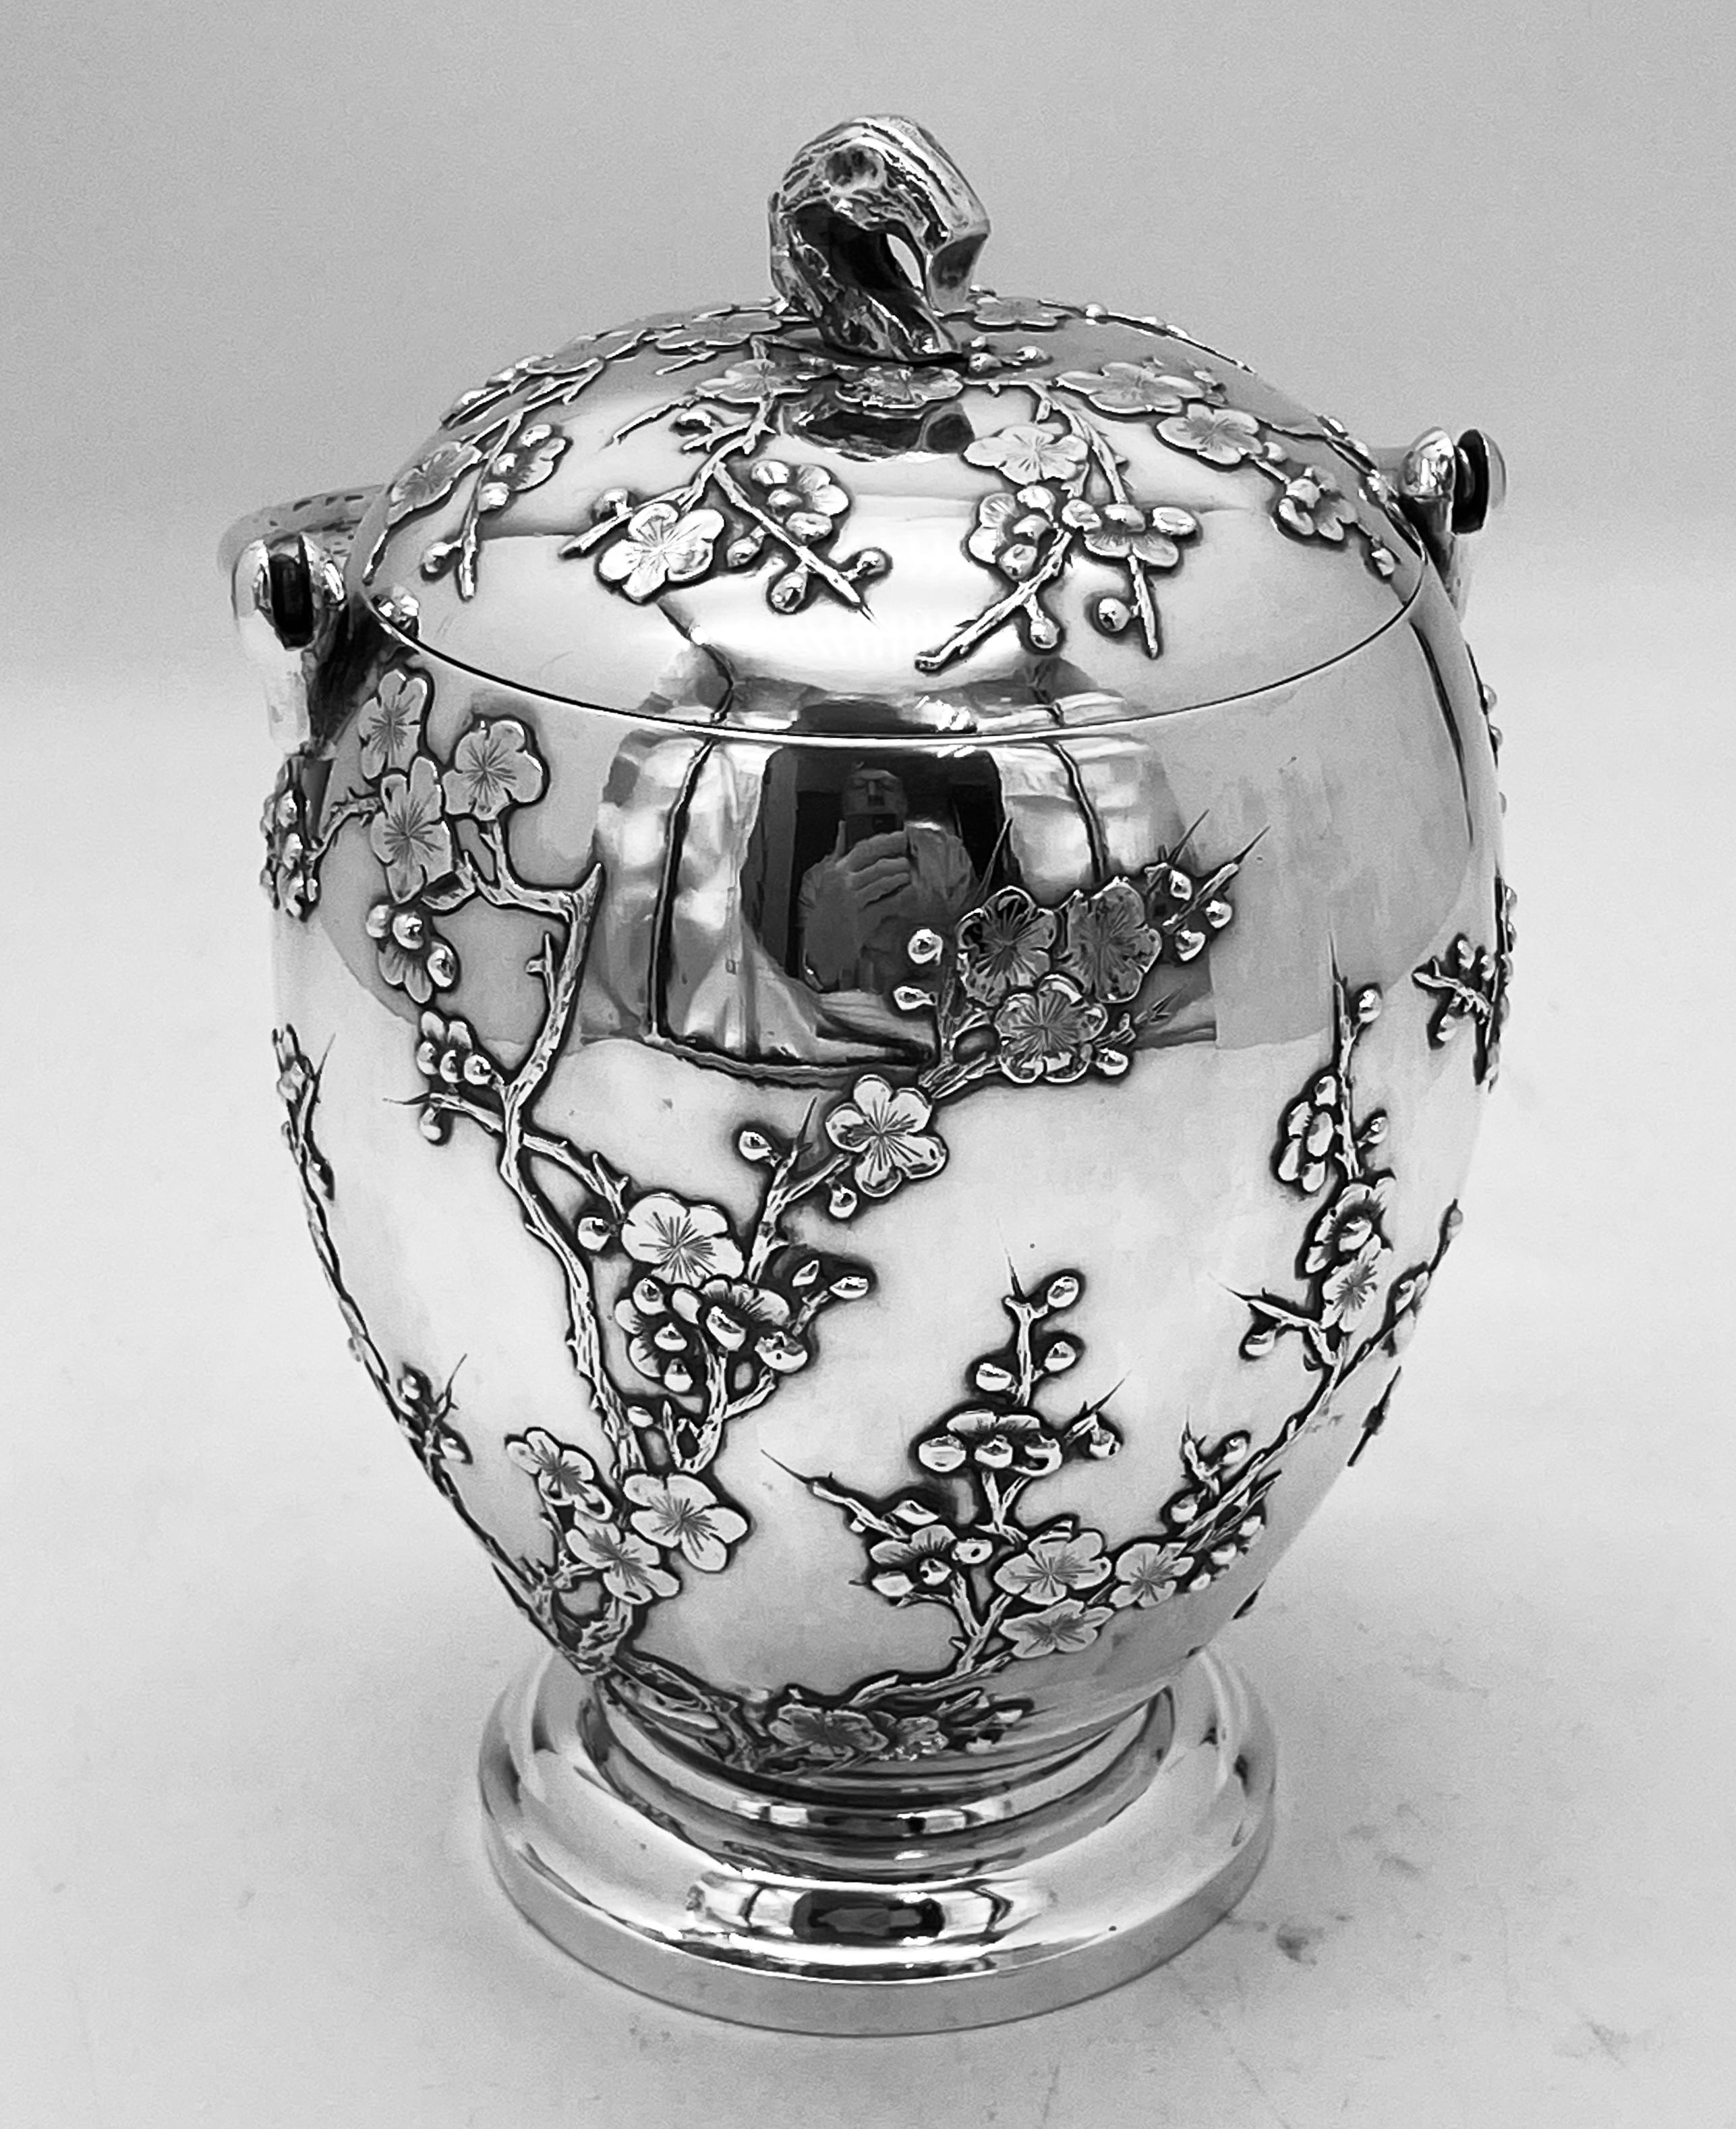 A Chinese Export Silver Biscuit Box, round with a collet foot and profusely decorated with applied prunus. against a smooth plain background. The box has a pull-off lid with a twig finial, and a plain swing handle.
Whilst originally made to hold